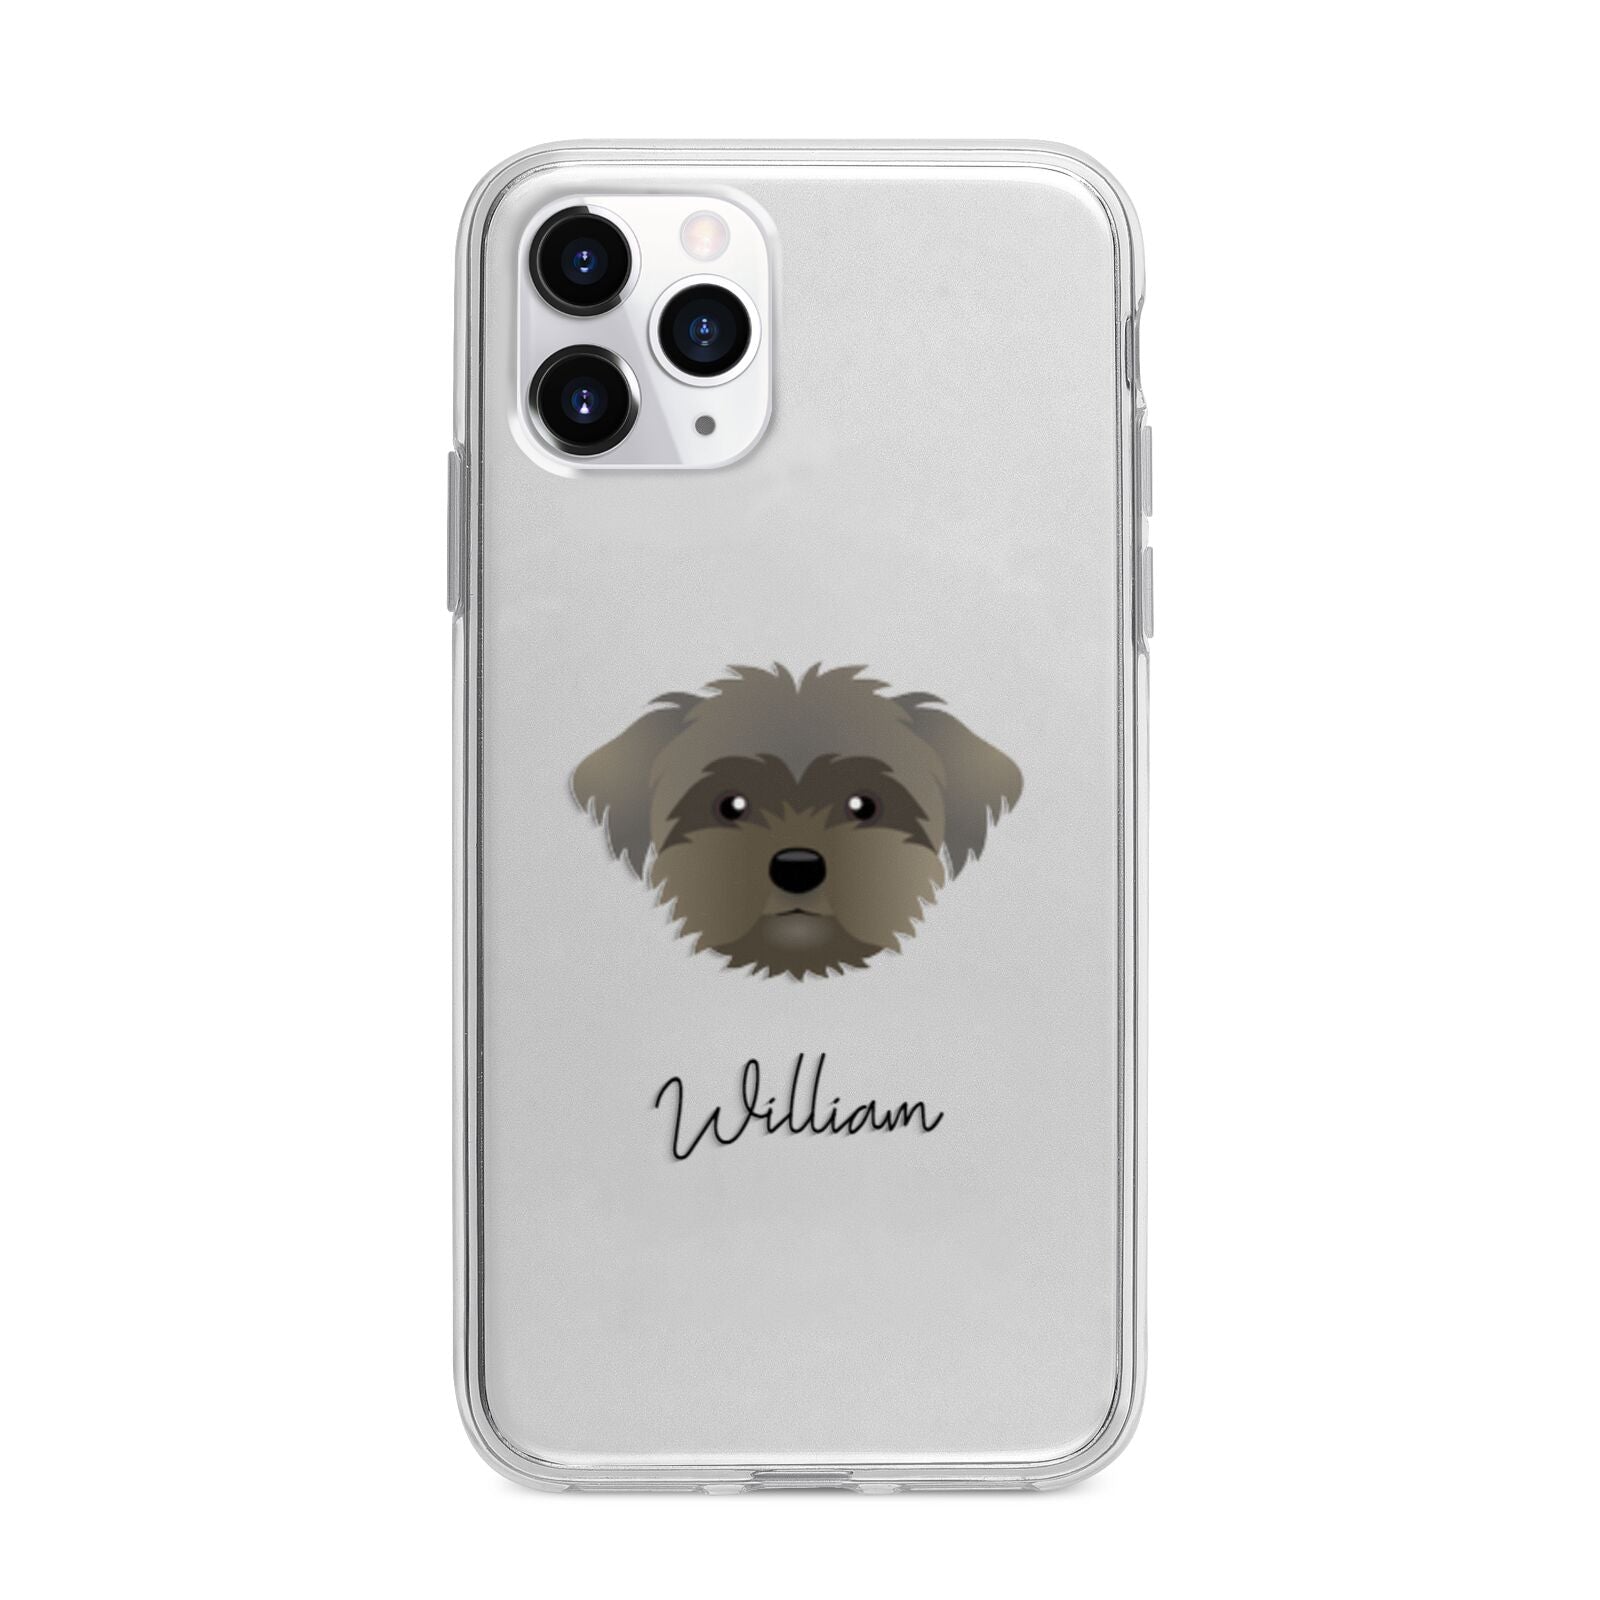 Peek a poo Personalised Apple iPhone 11 Pro Max in Silver with Bumper Case